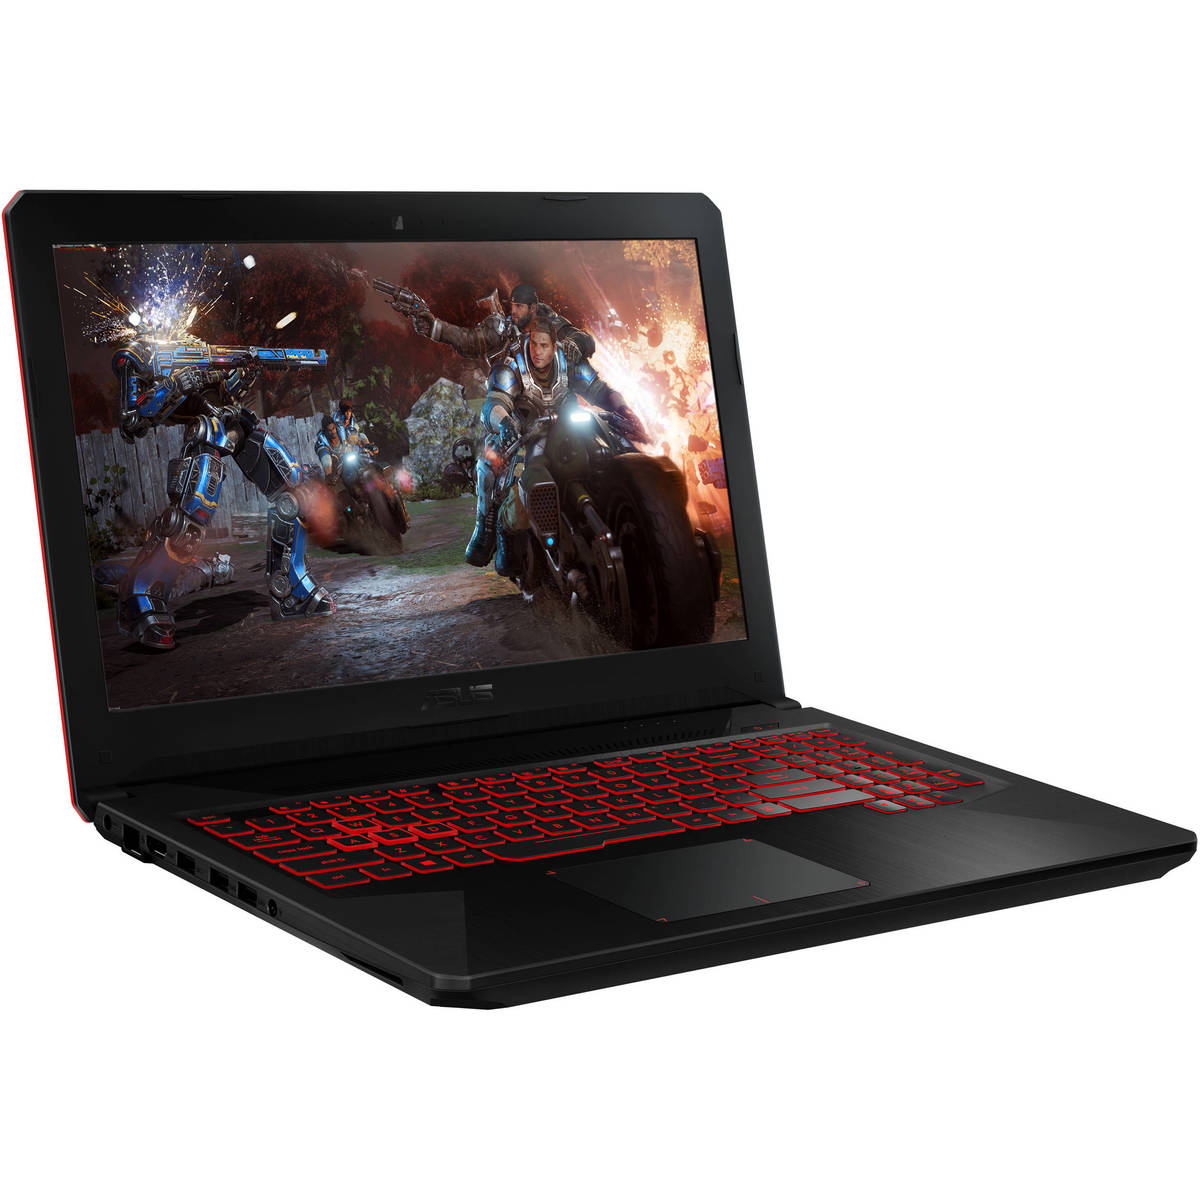 Asus Gaming Notebook FX504GD-DM812T Core i7 Red